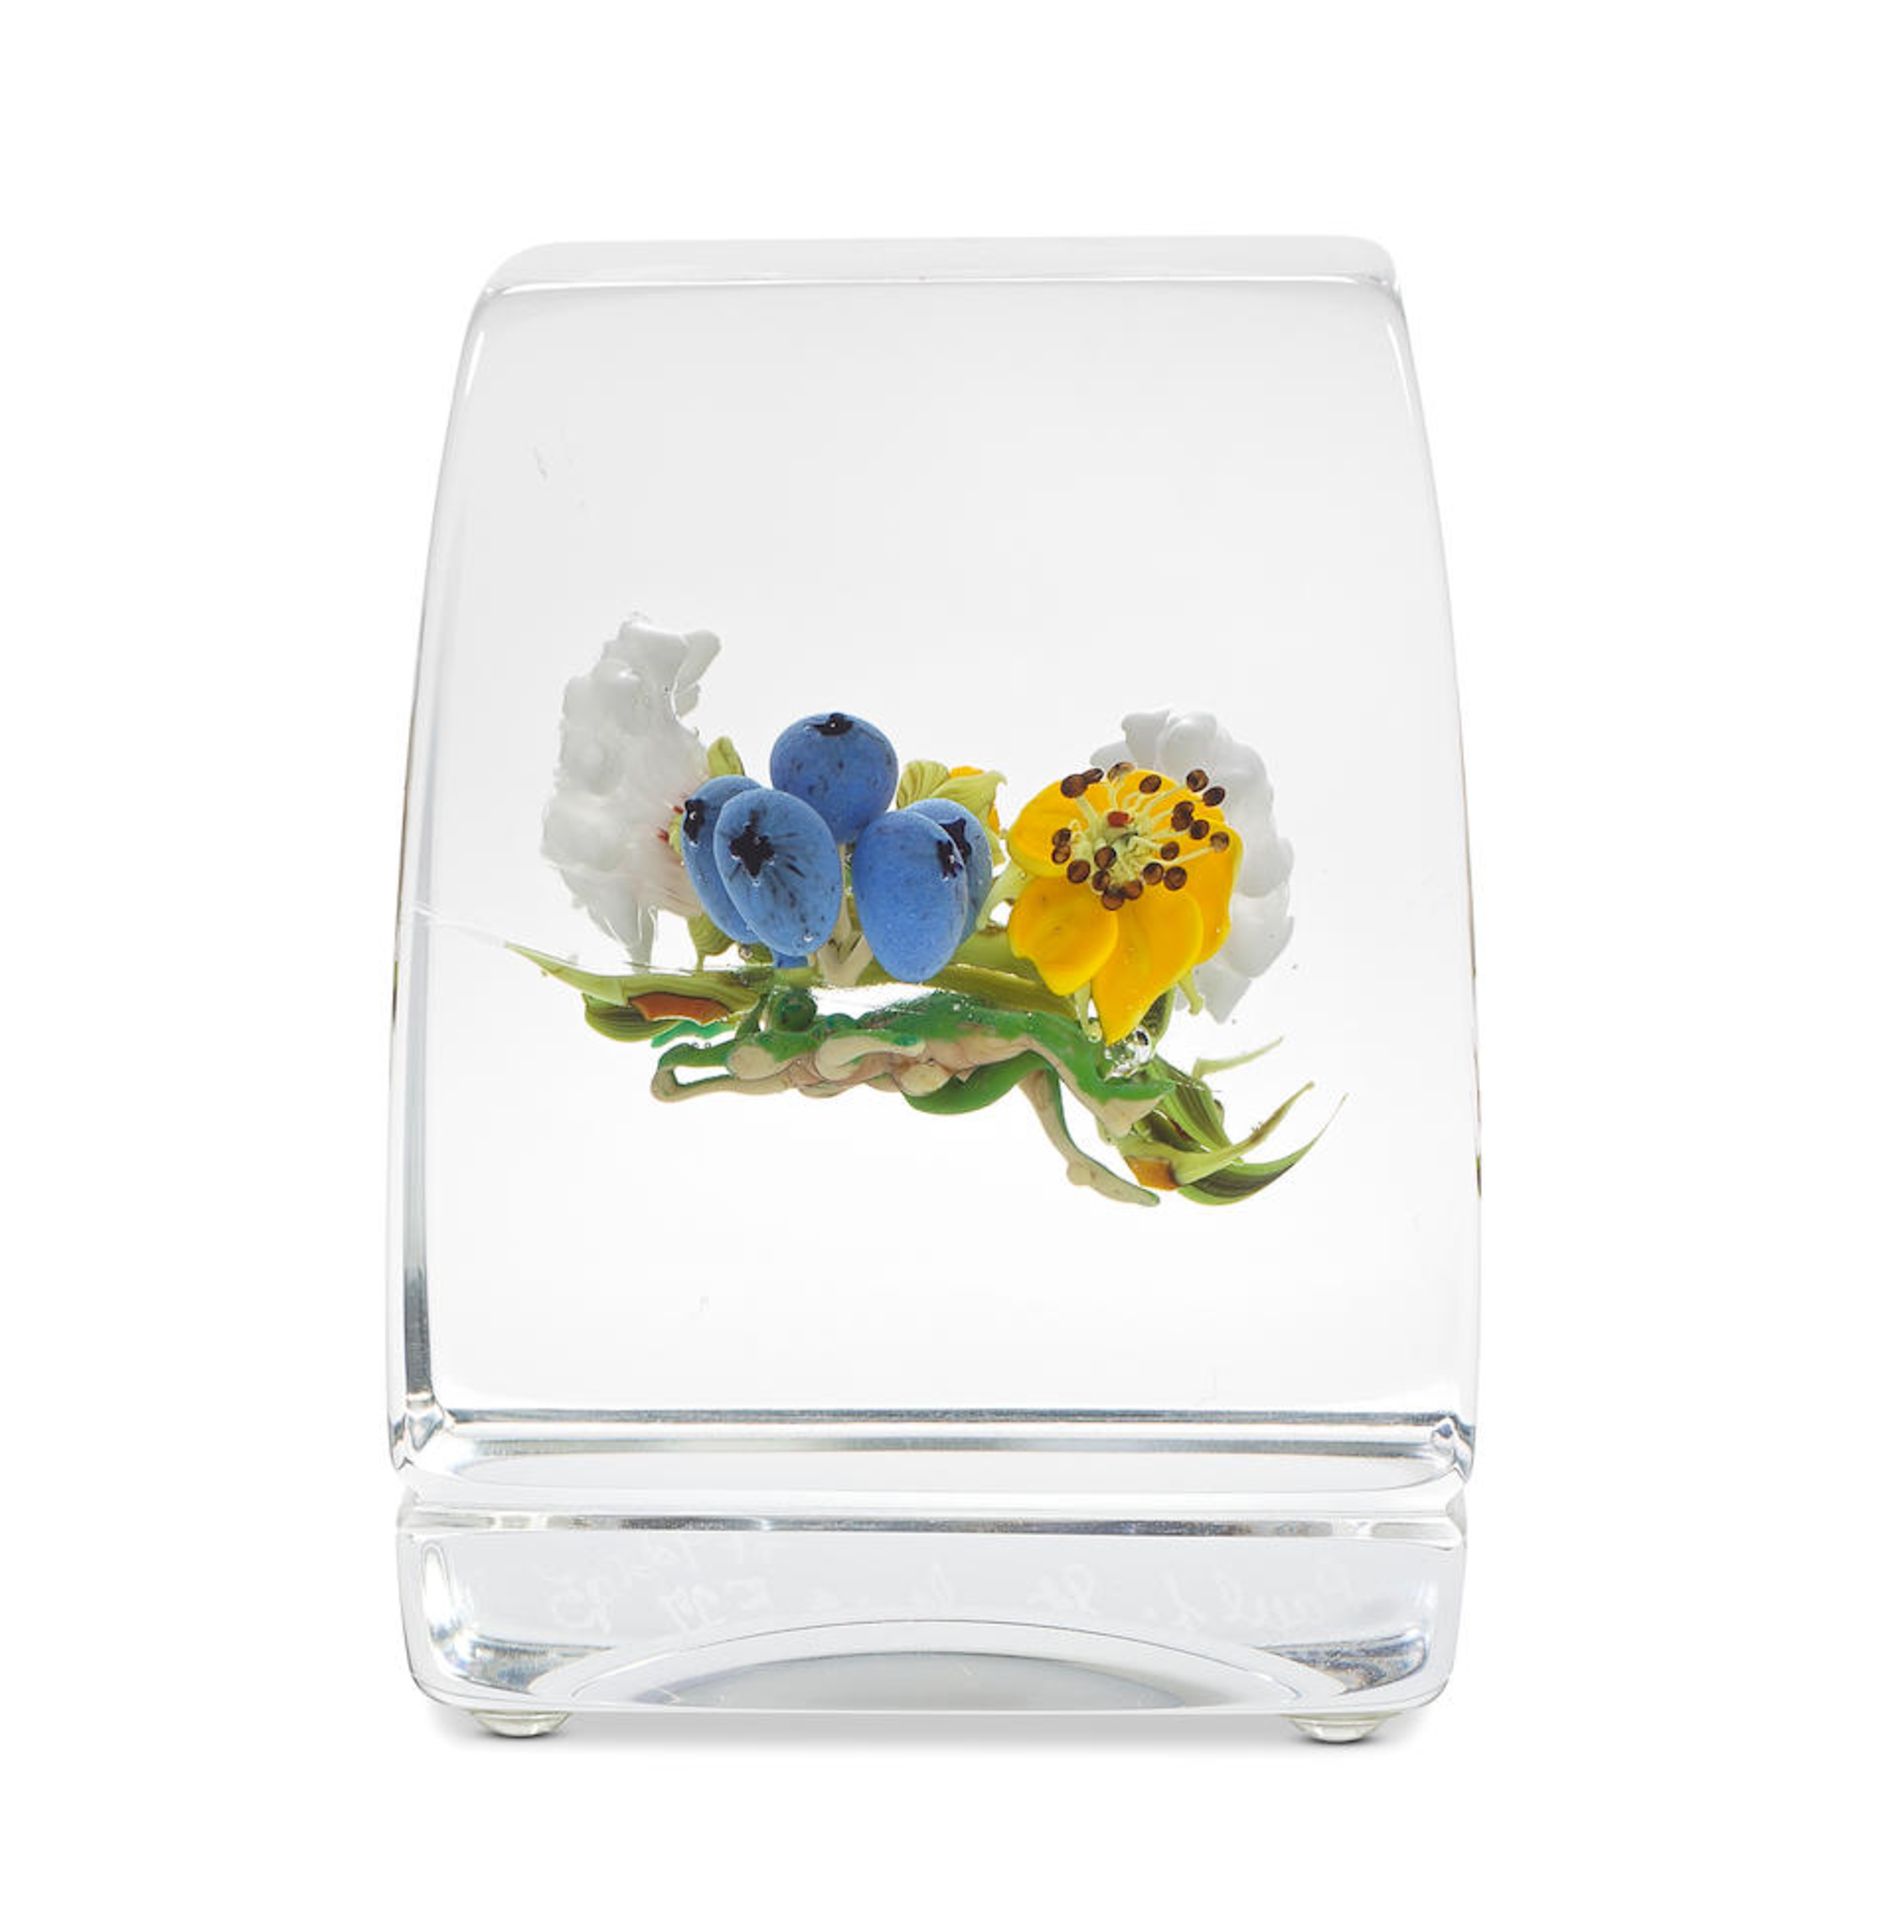 A Paul Stankard coronet bouquet 'Botanical Cube' upright paperweight, dated 1995